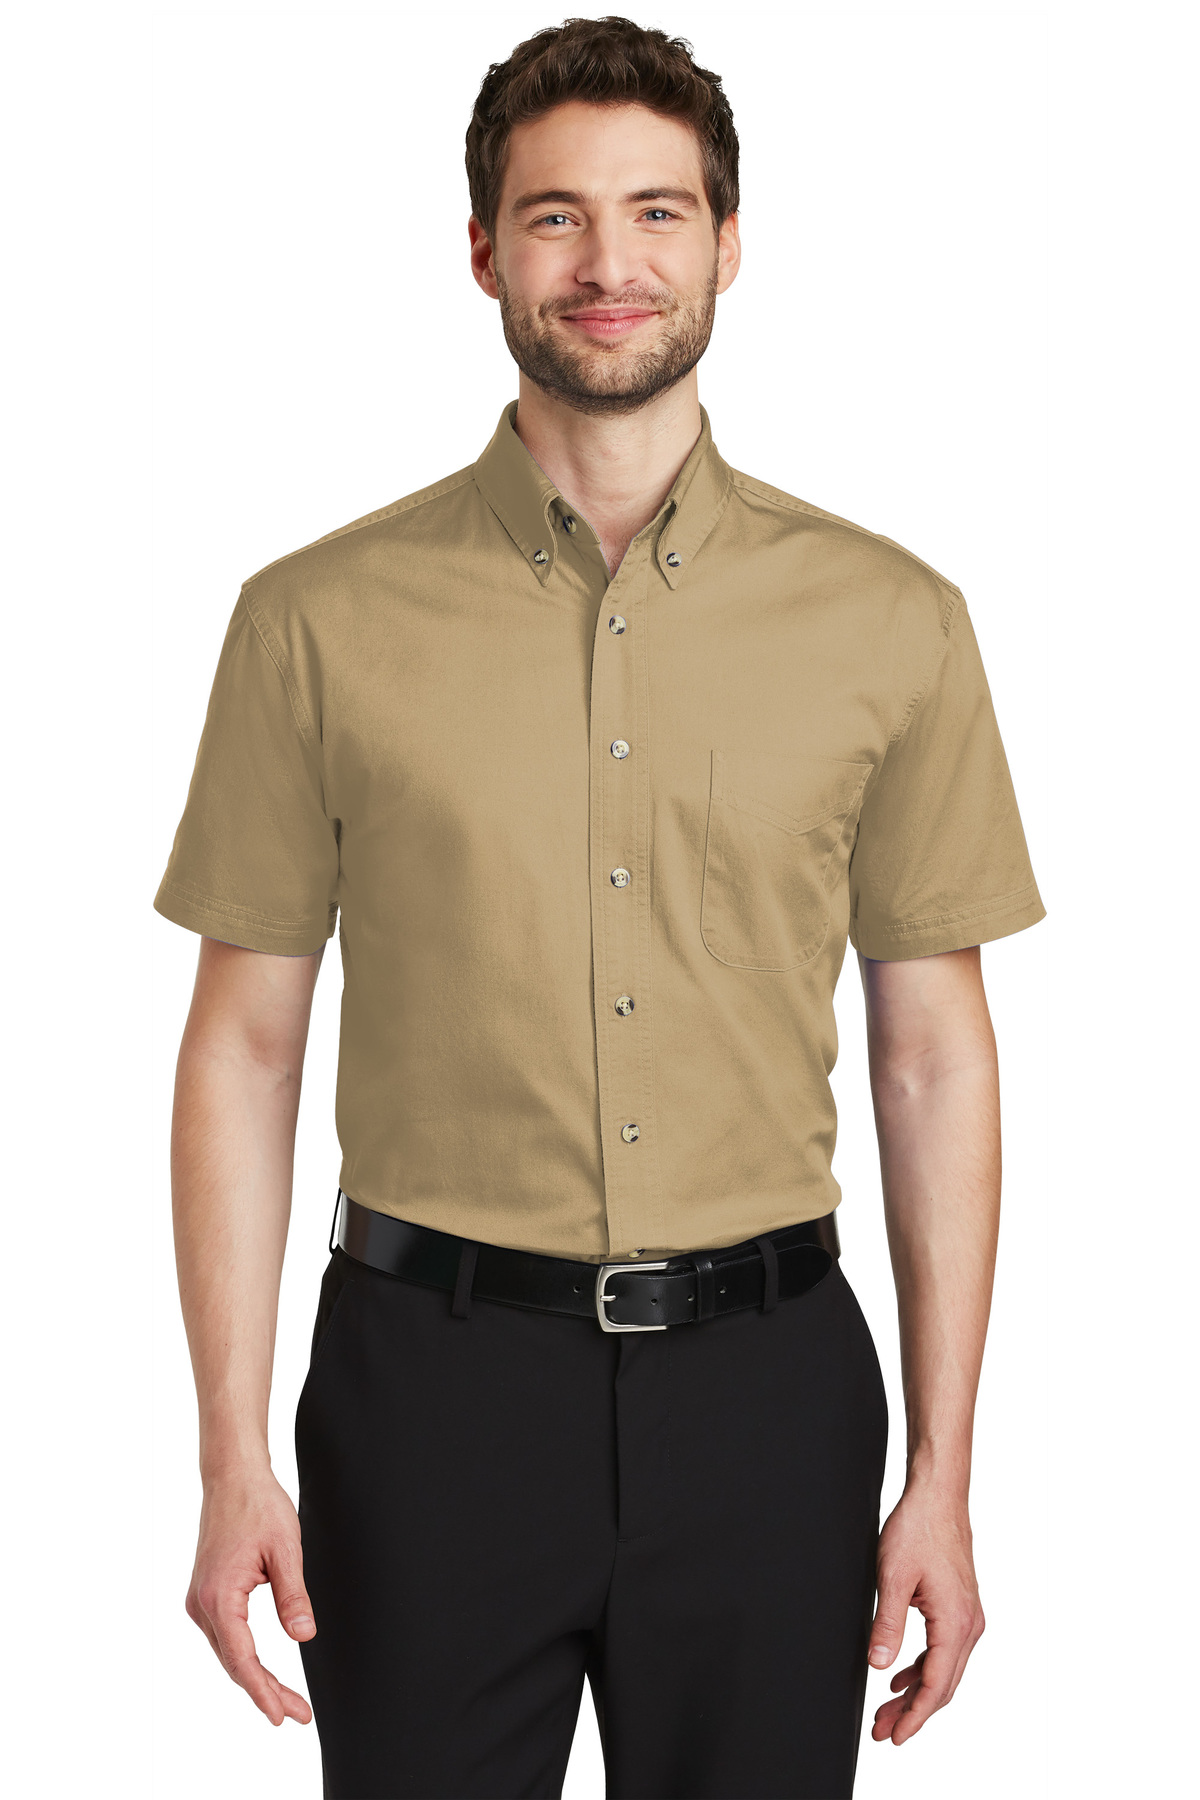 Port Authority Short Sleeve Twill Shirt | Product | Company Casuals